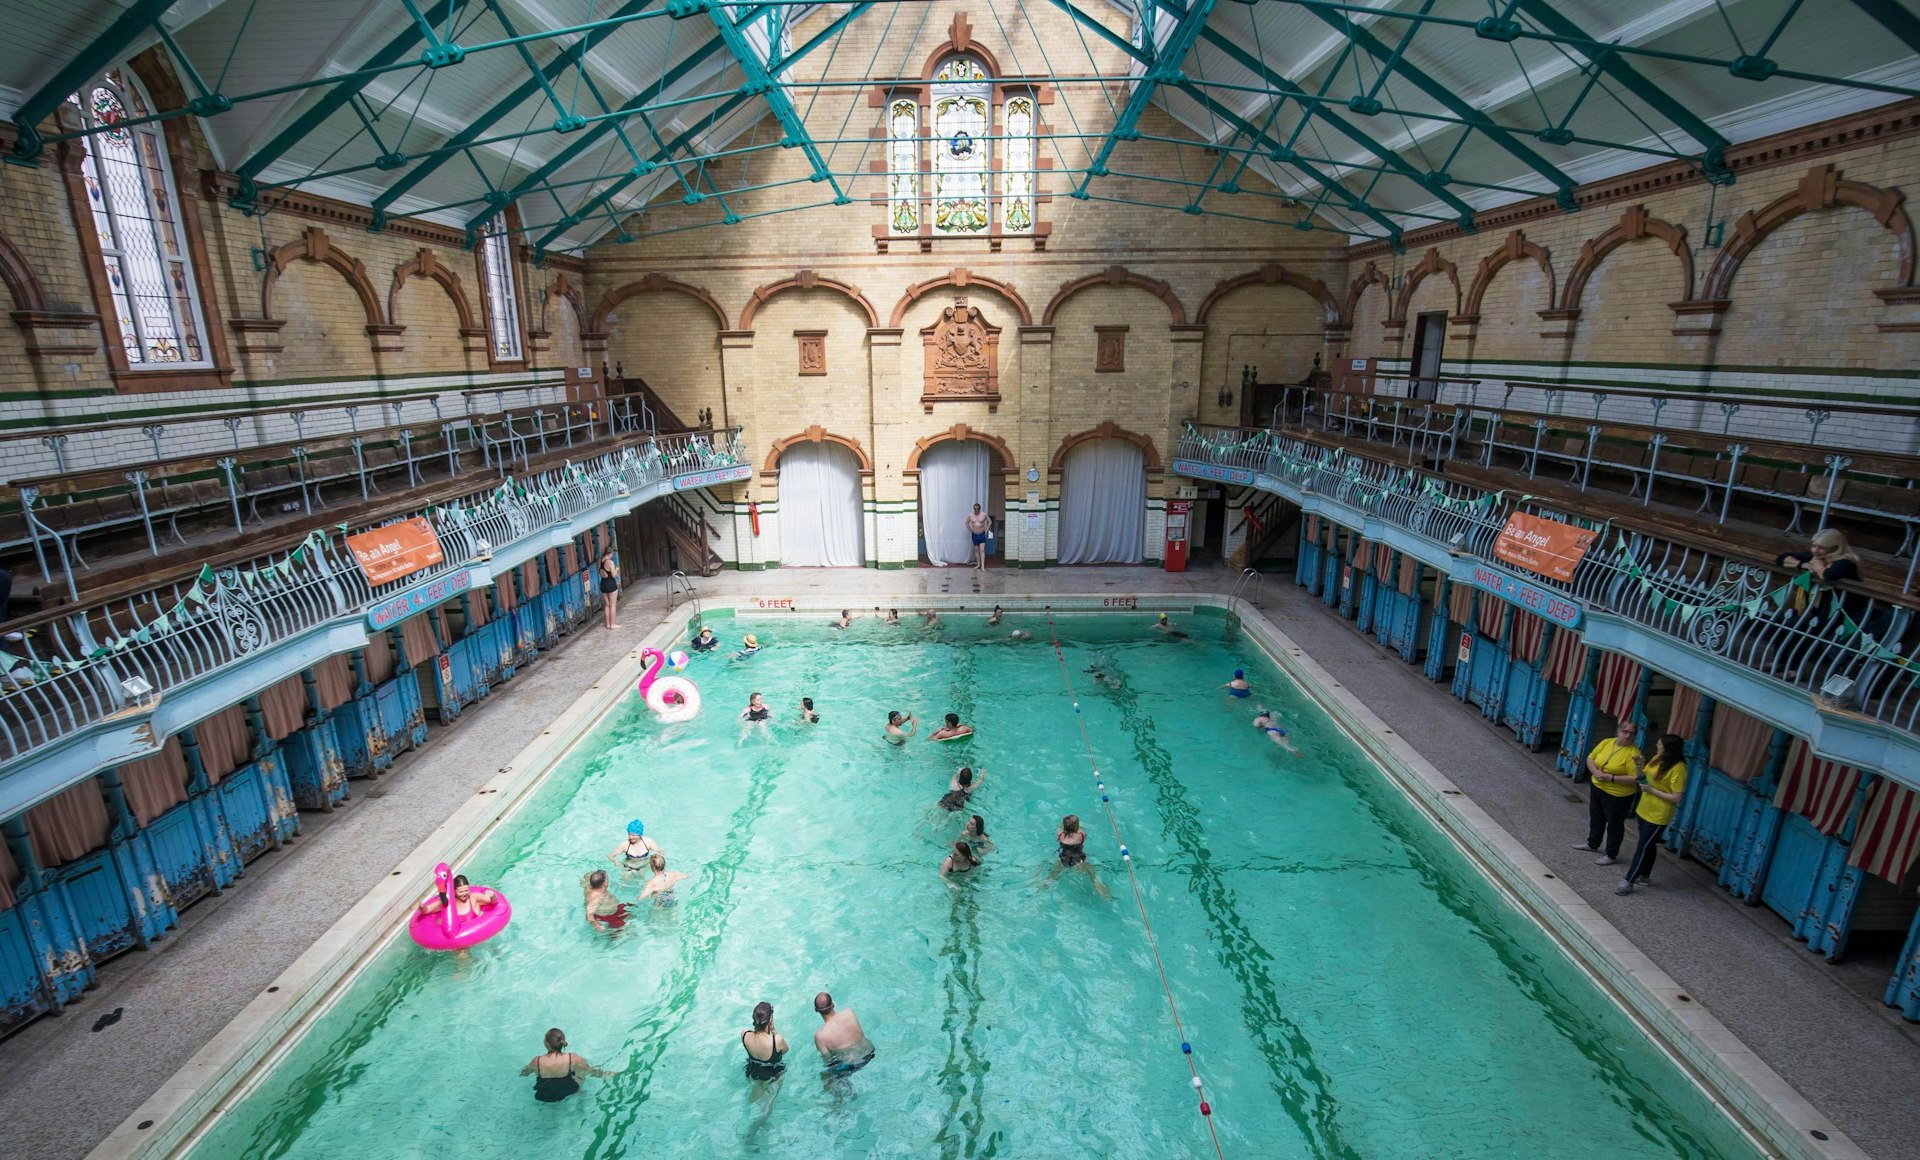 People Swimming in the Men's First Class Pool at Victoria Baths in Manchester, which is having an open swim day to raise funds for restoration work